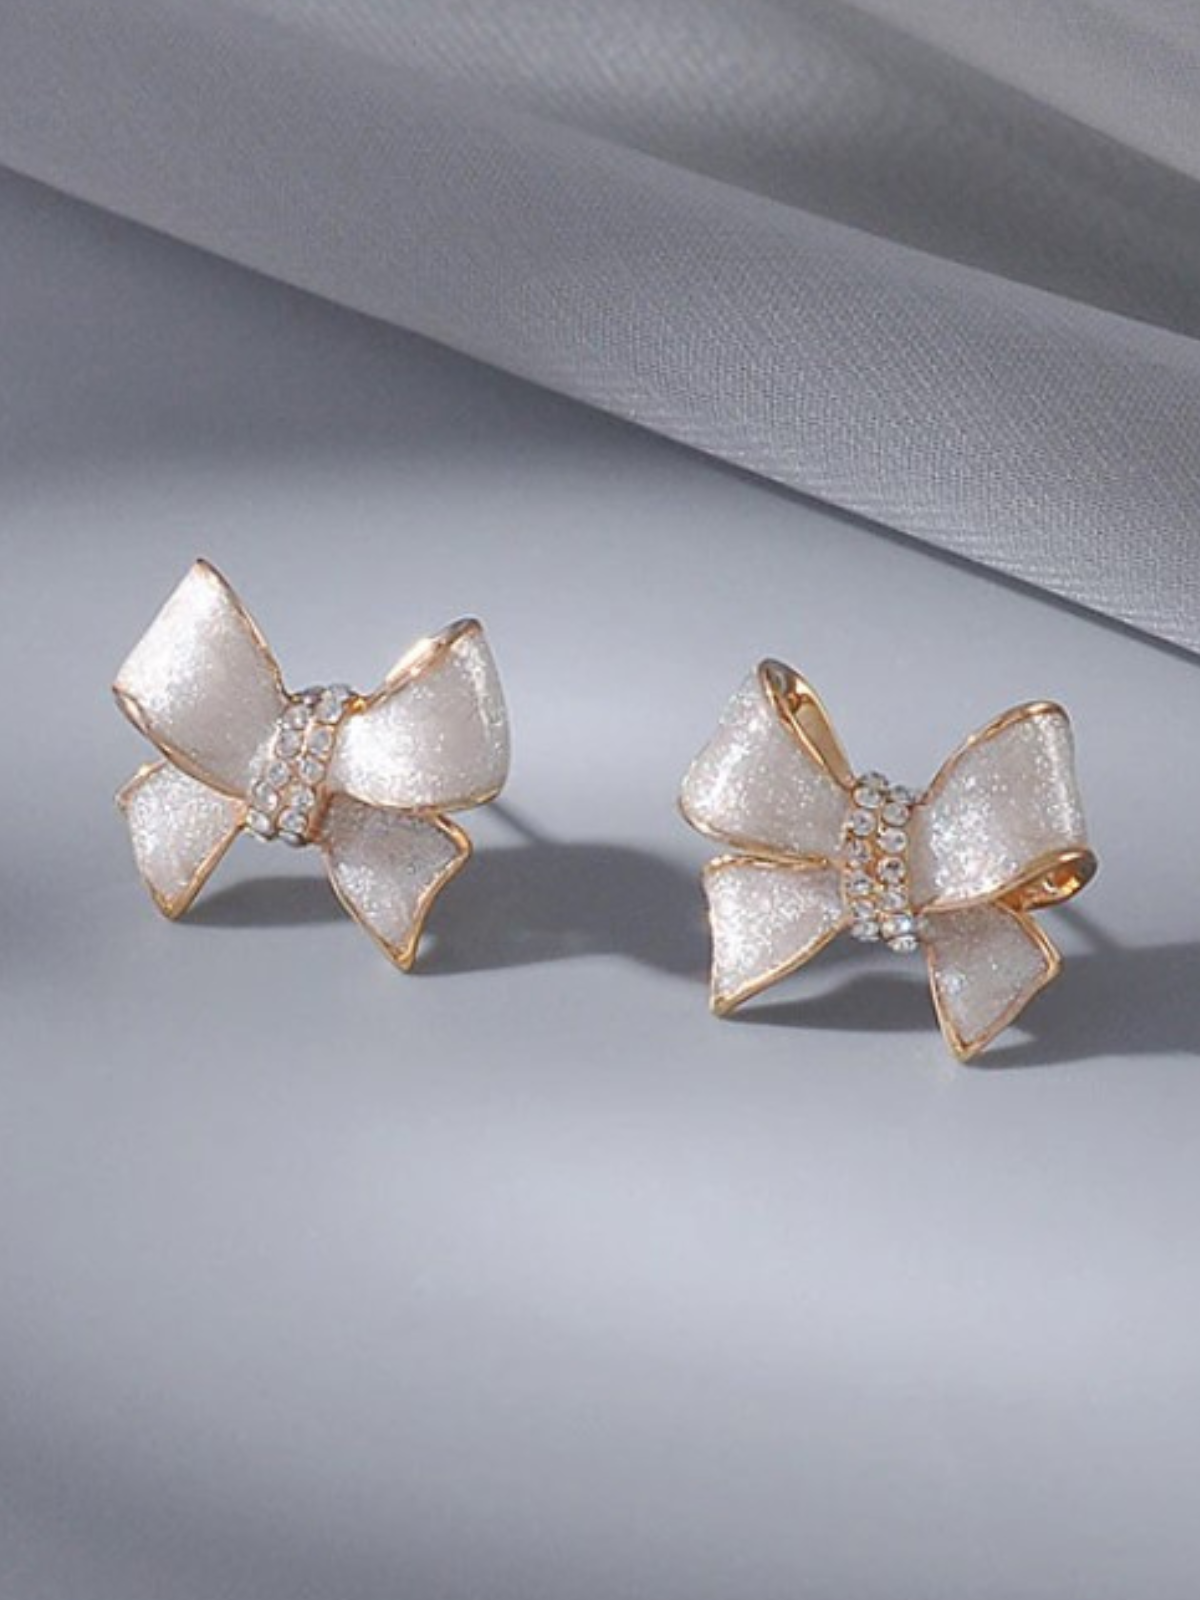 Mia Belle Girls Sparkly Bowknot Earrings | Girls Accessories